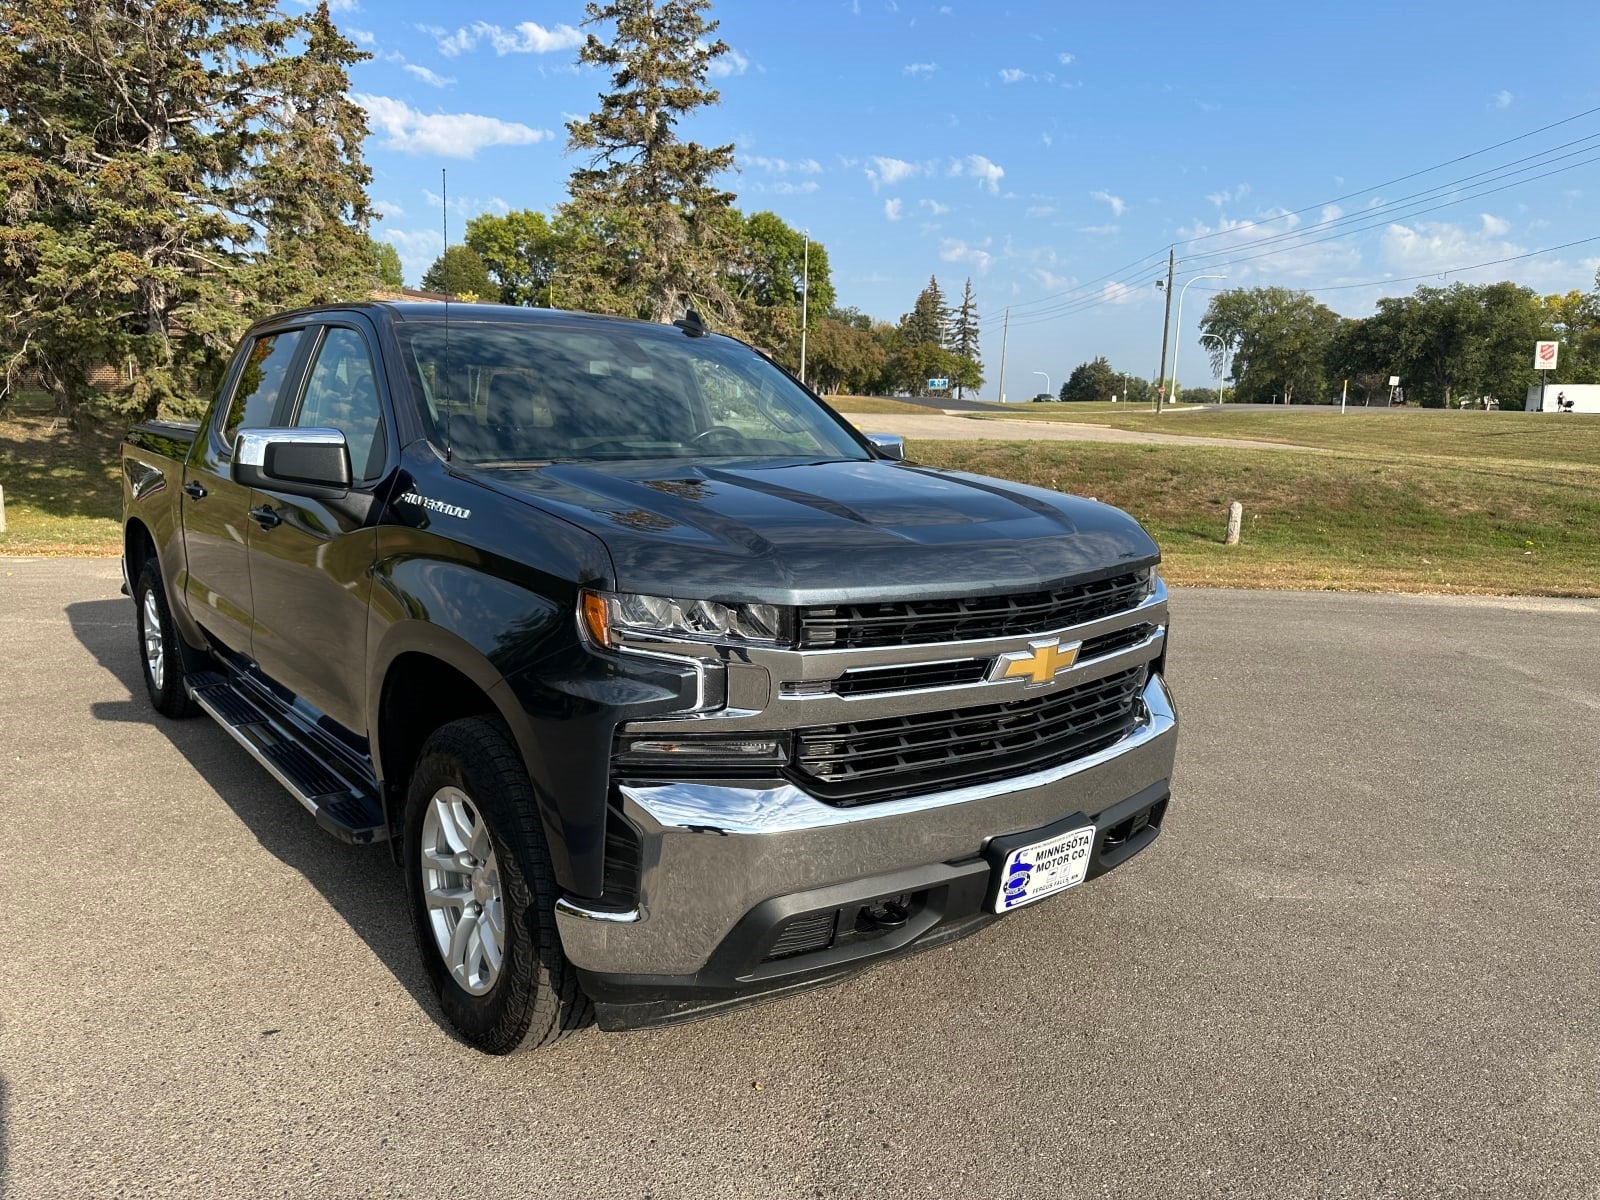 Used 2021 Chevrolet Silverado 1500 LT with VIN 1GCUYDED3MZ387108 for sale in Fergus Falls, Minnesota